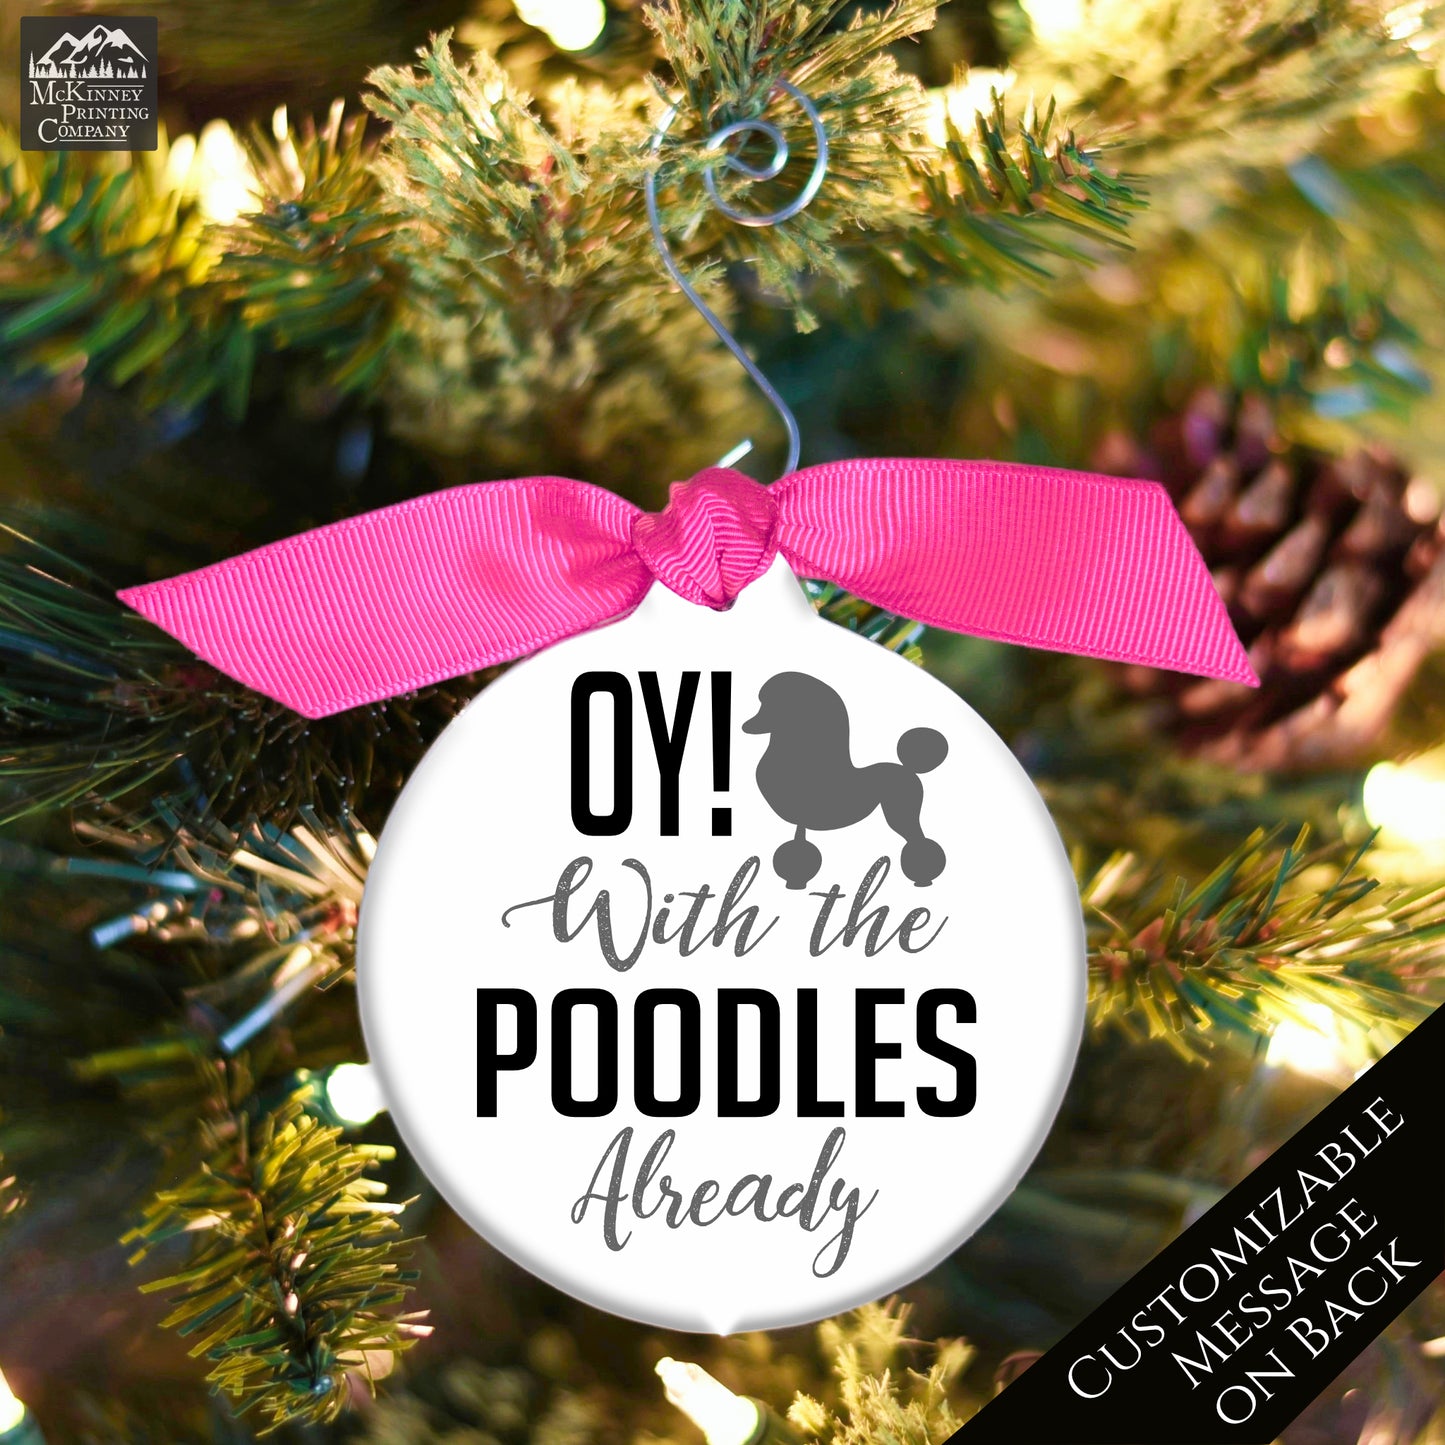 Gilmore Girls - Christmas Ornament, Quotes, Oy with the Poodles, Gift